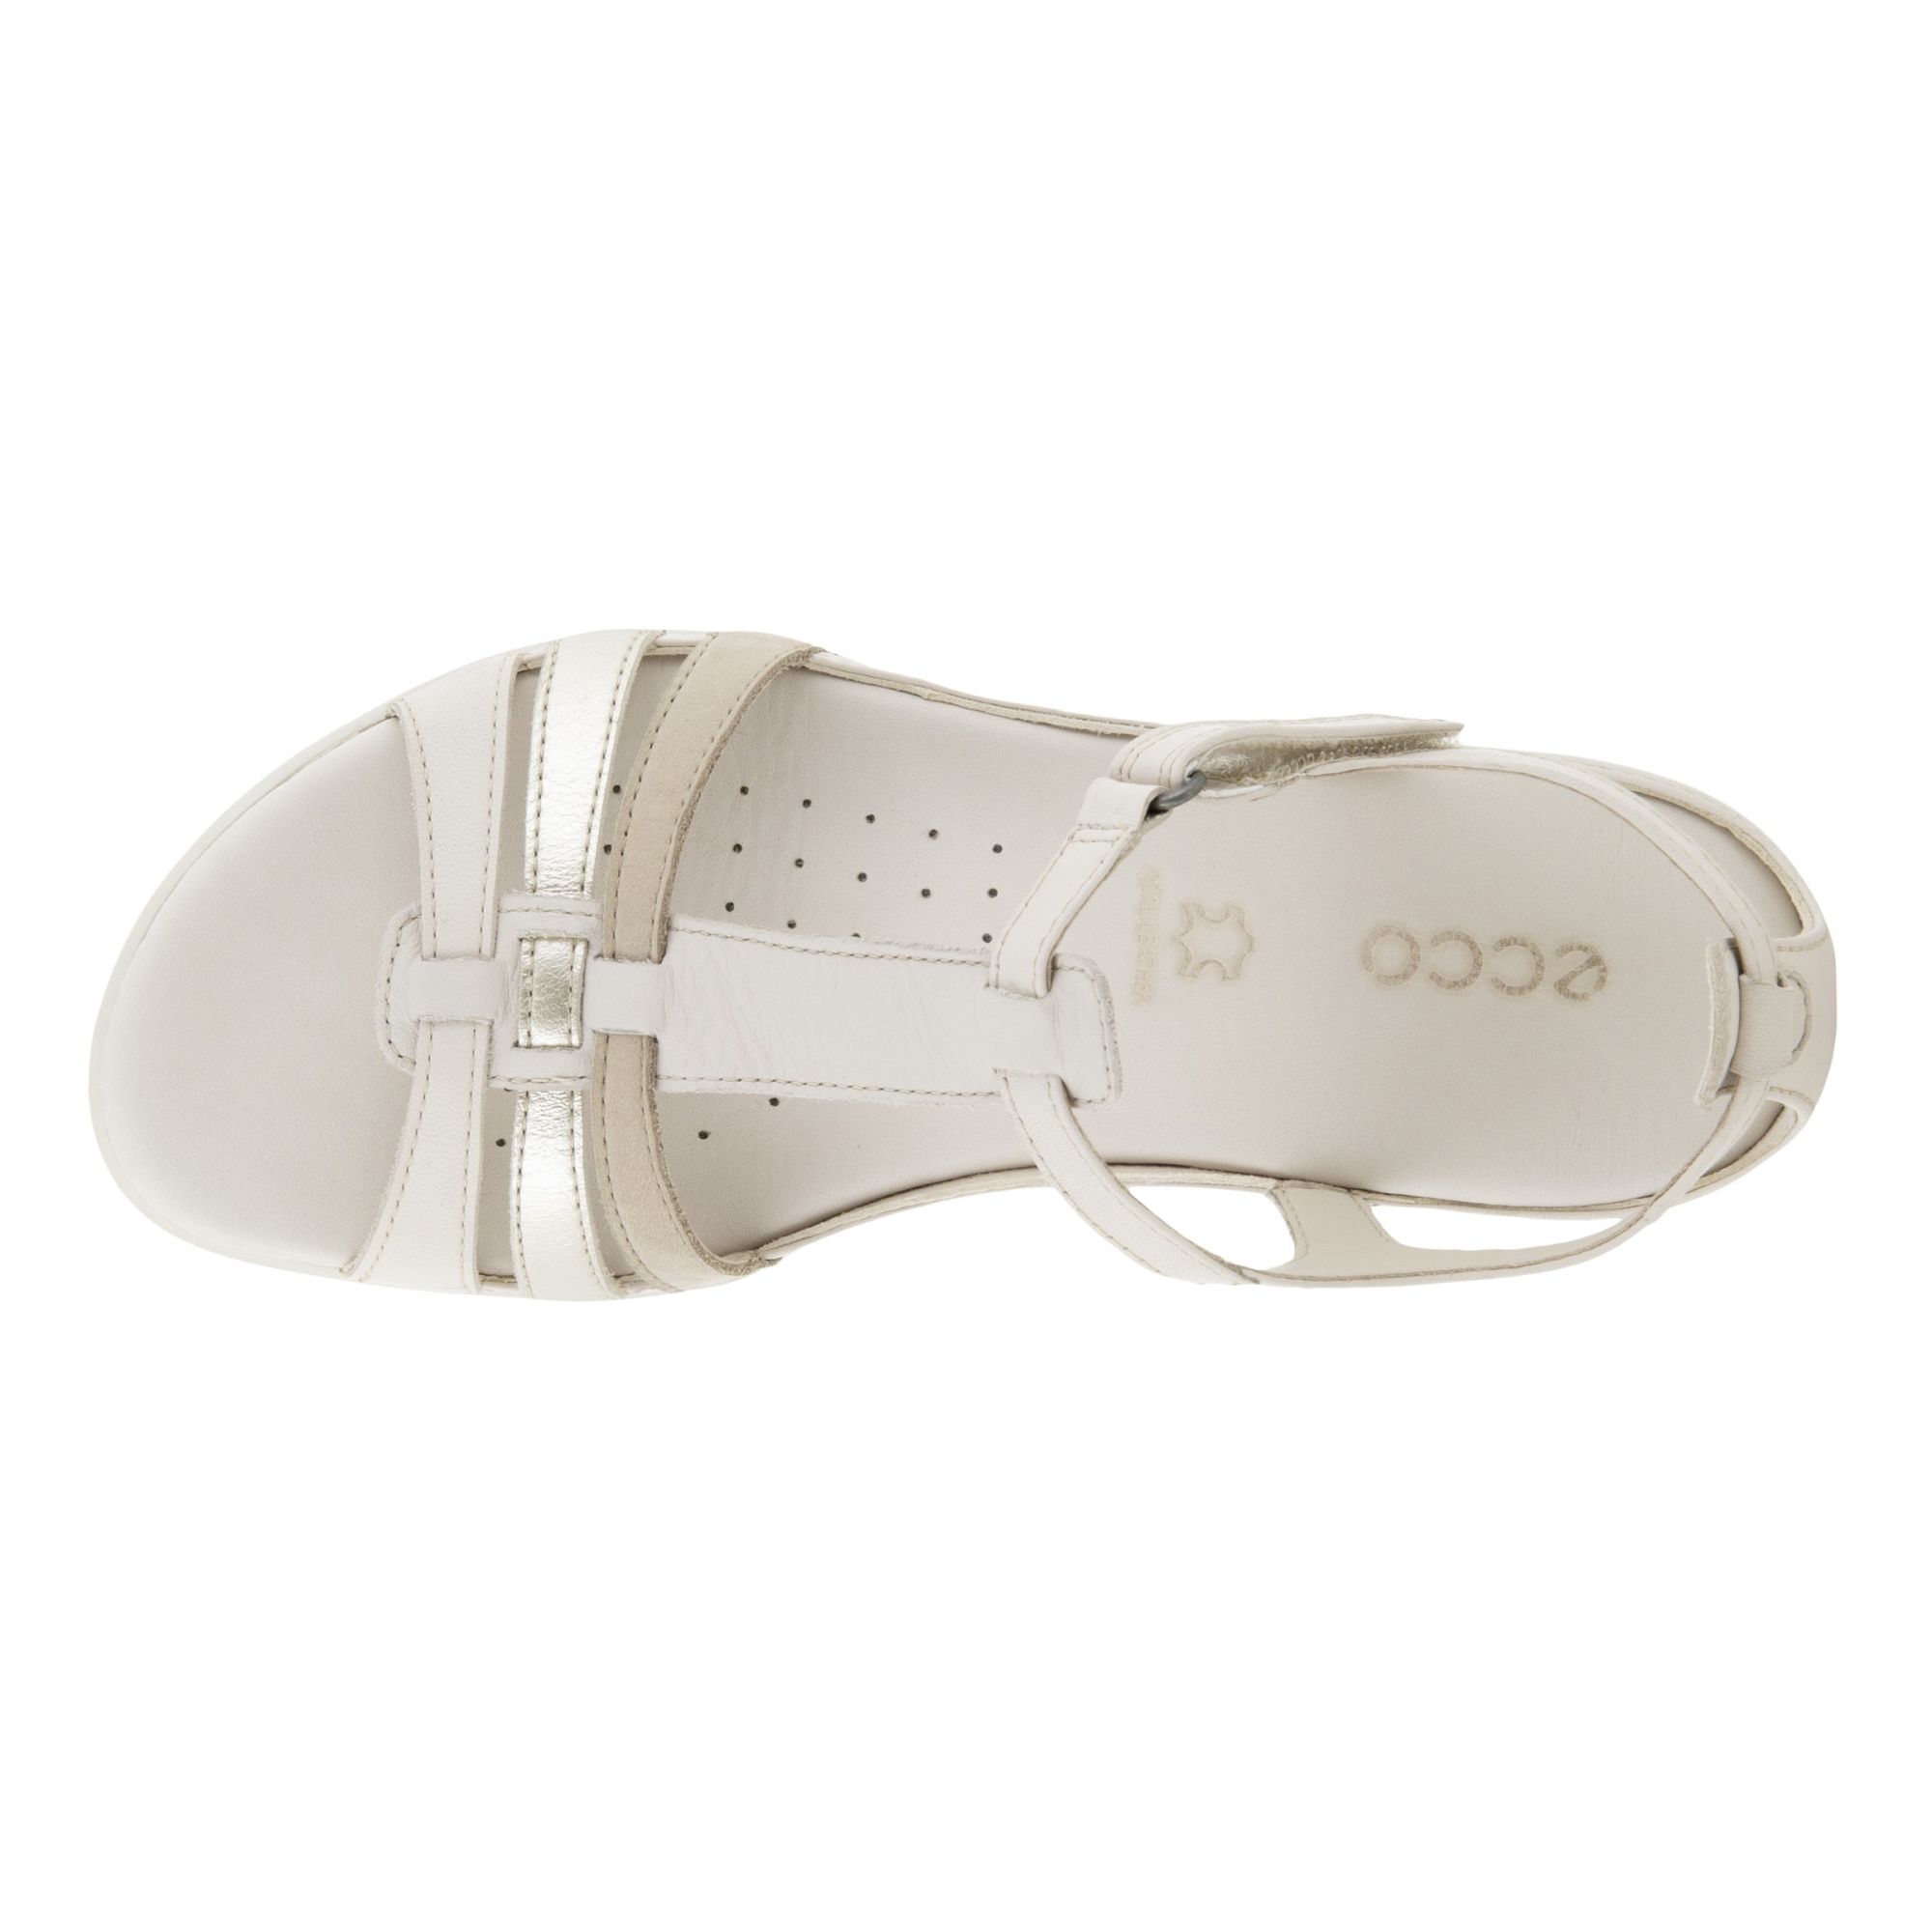 Ecco Flash T-Strap Sandal 43 - Products - Veryk Mall - Veryk Mall 